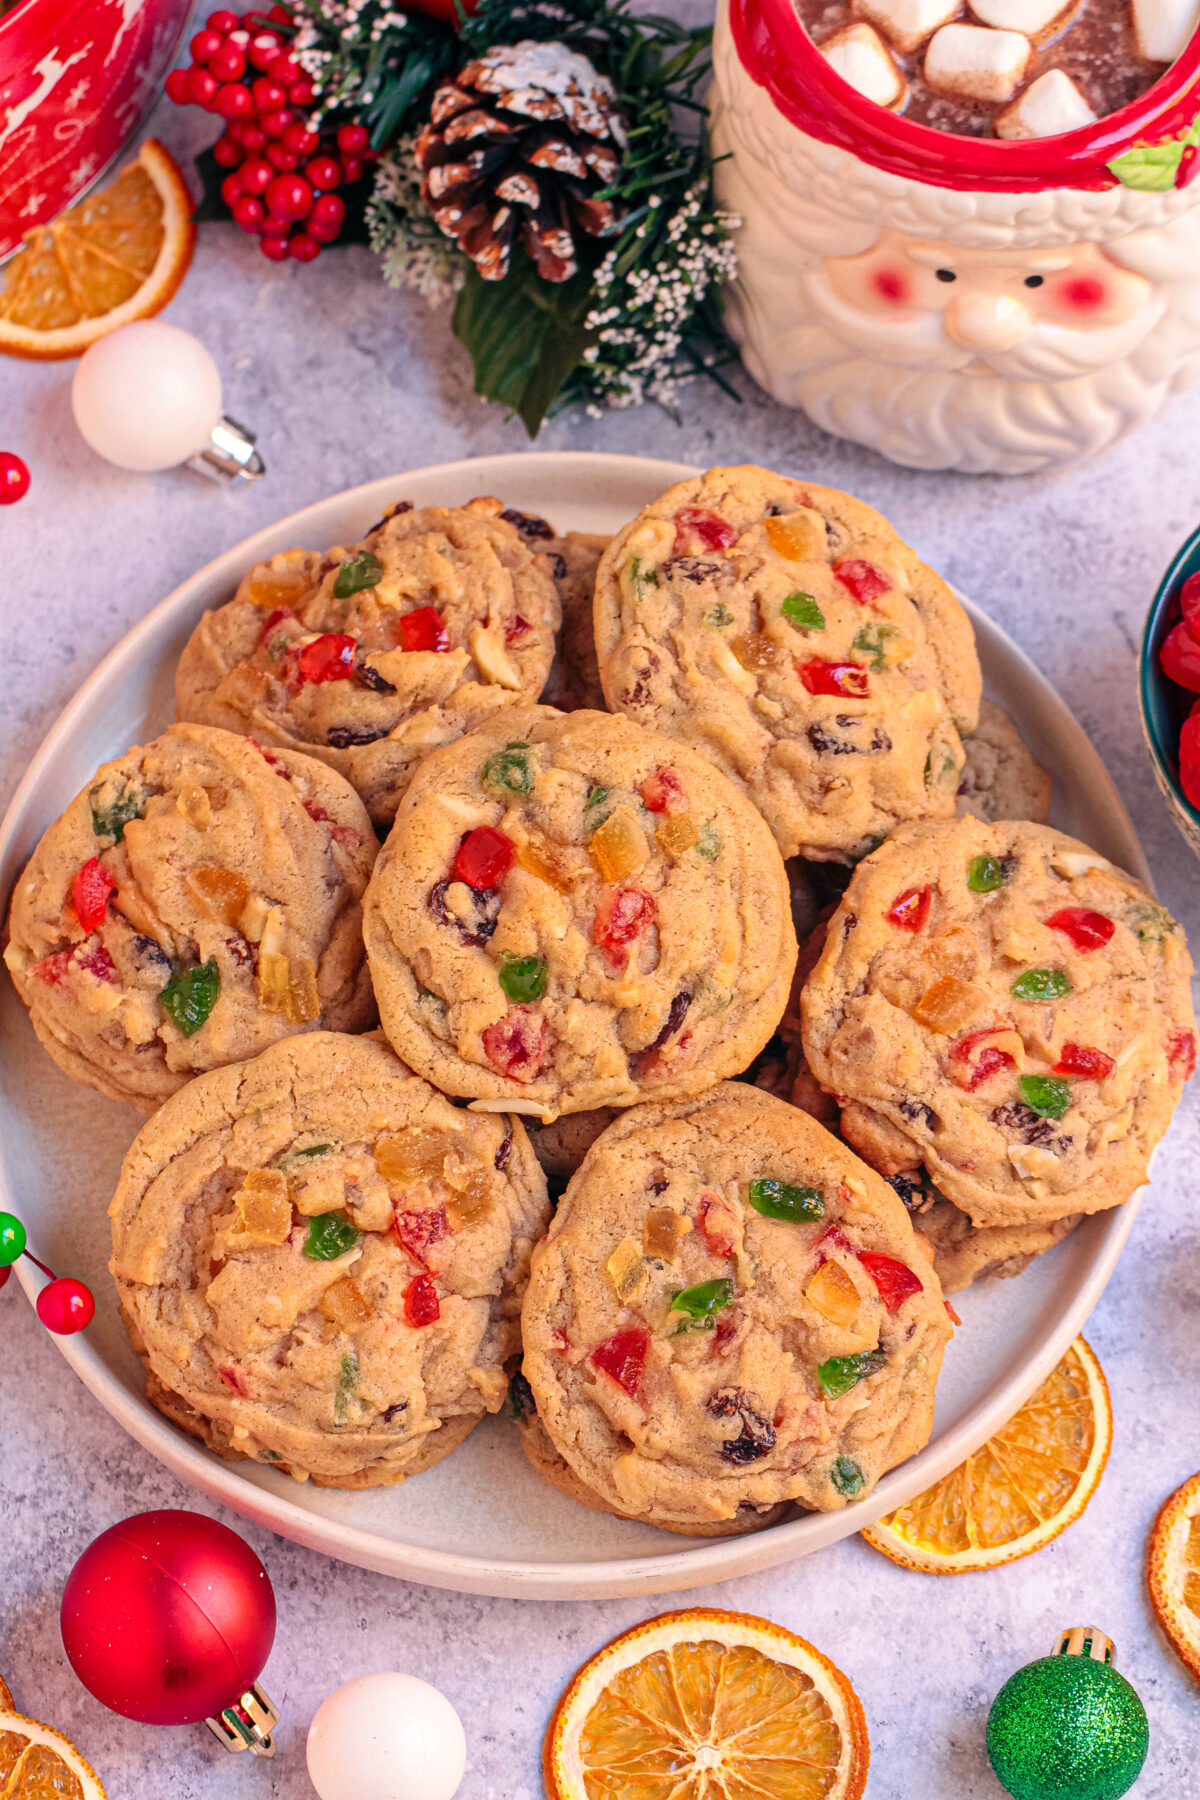 If you love fruitcake, these delicious and festive fruitcake cookies are the perfect addition to your holiday baking lineup.